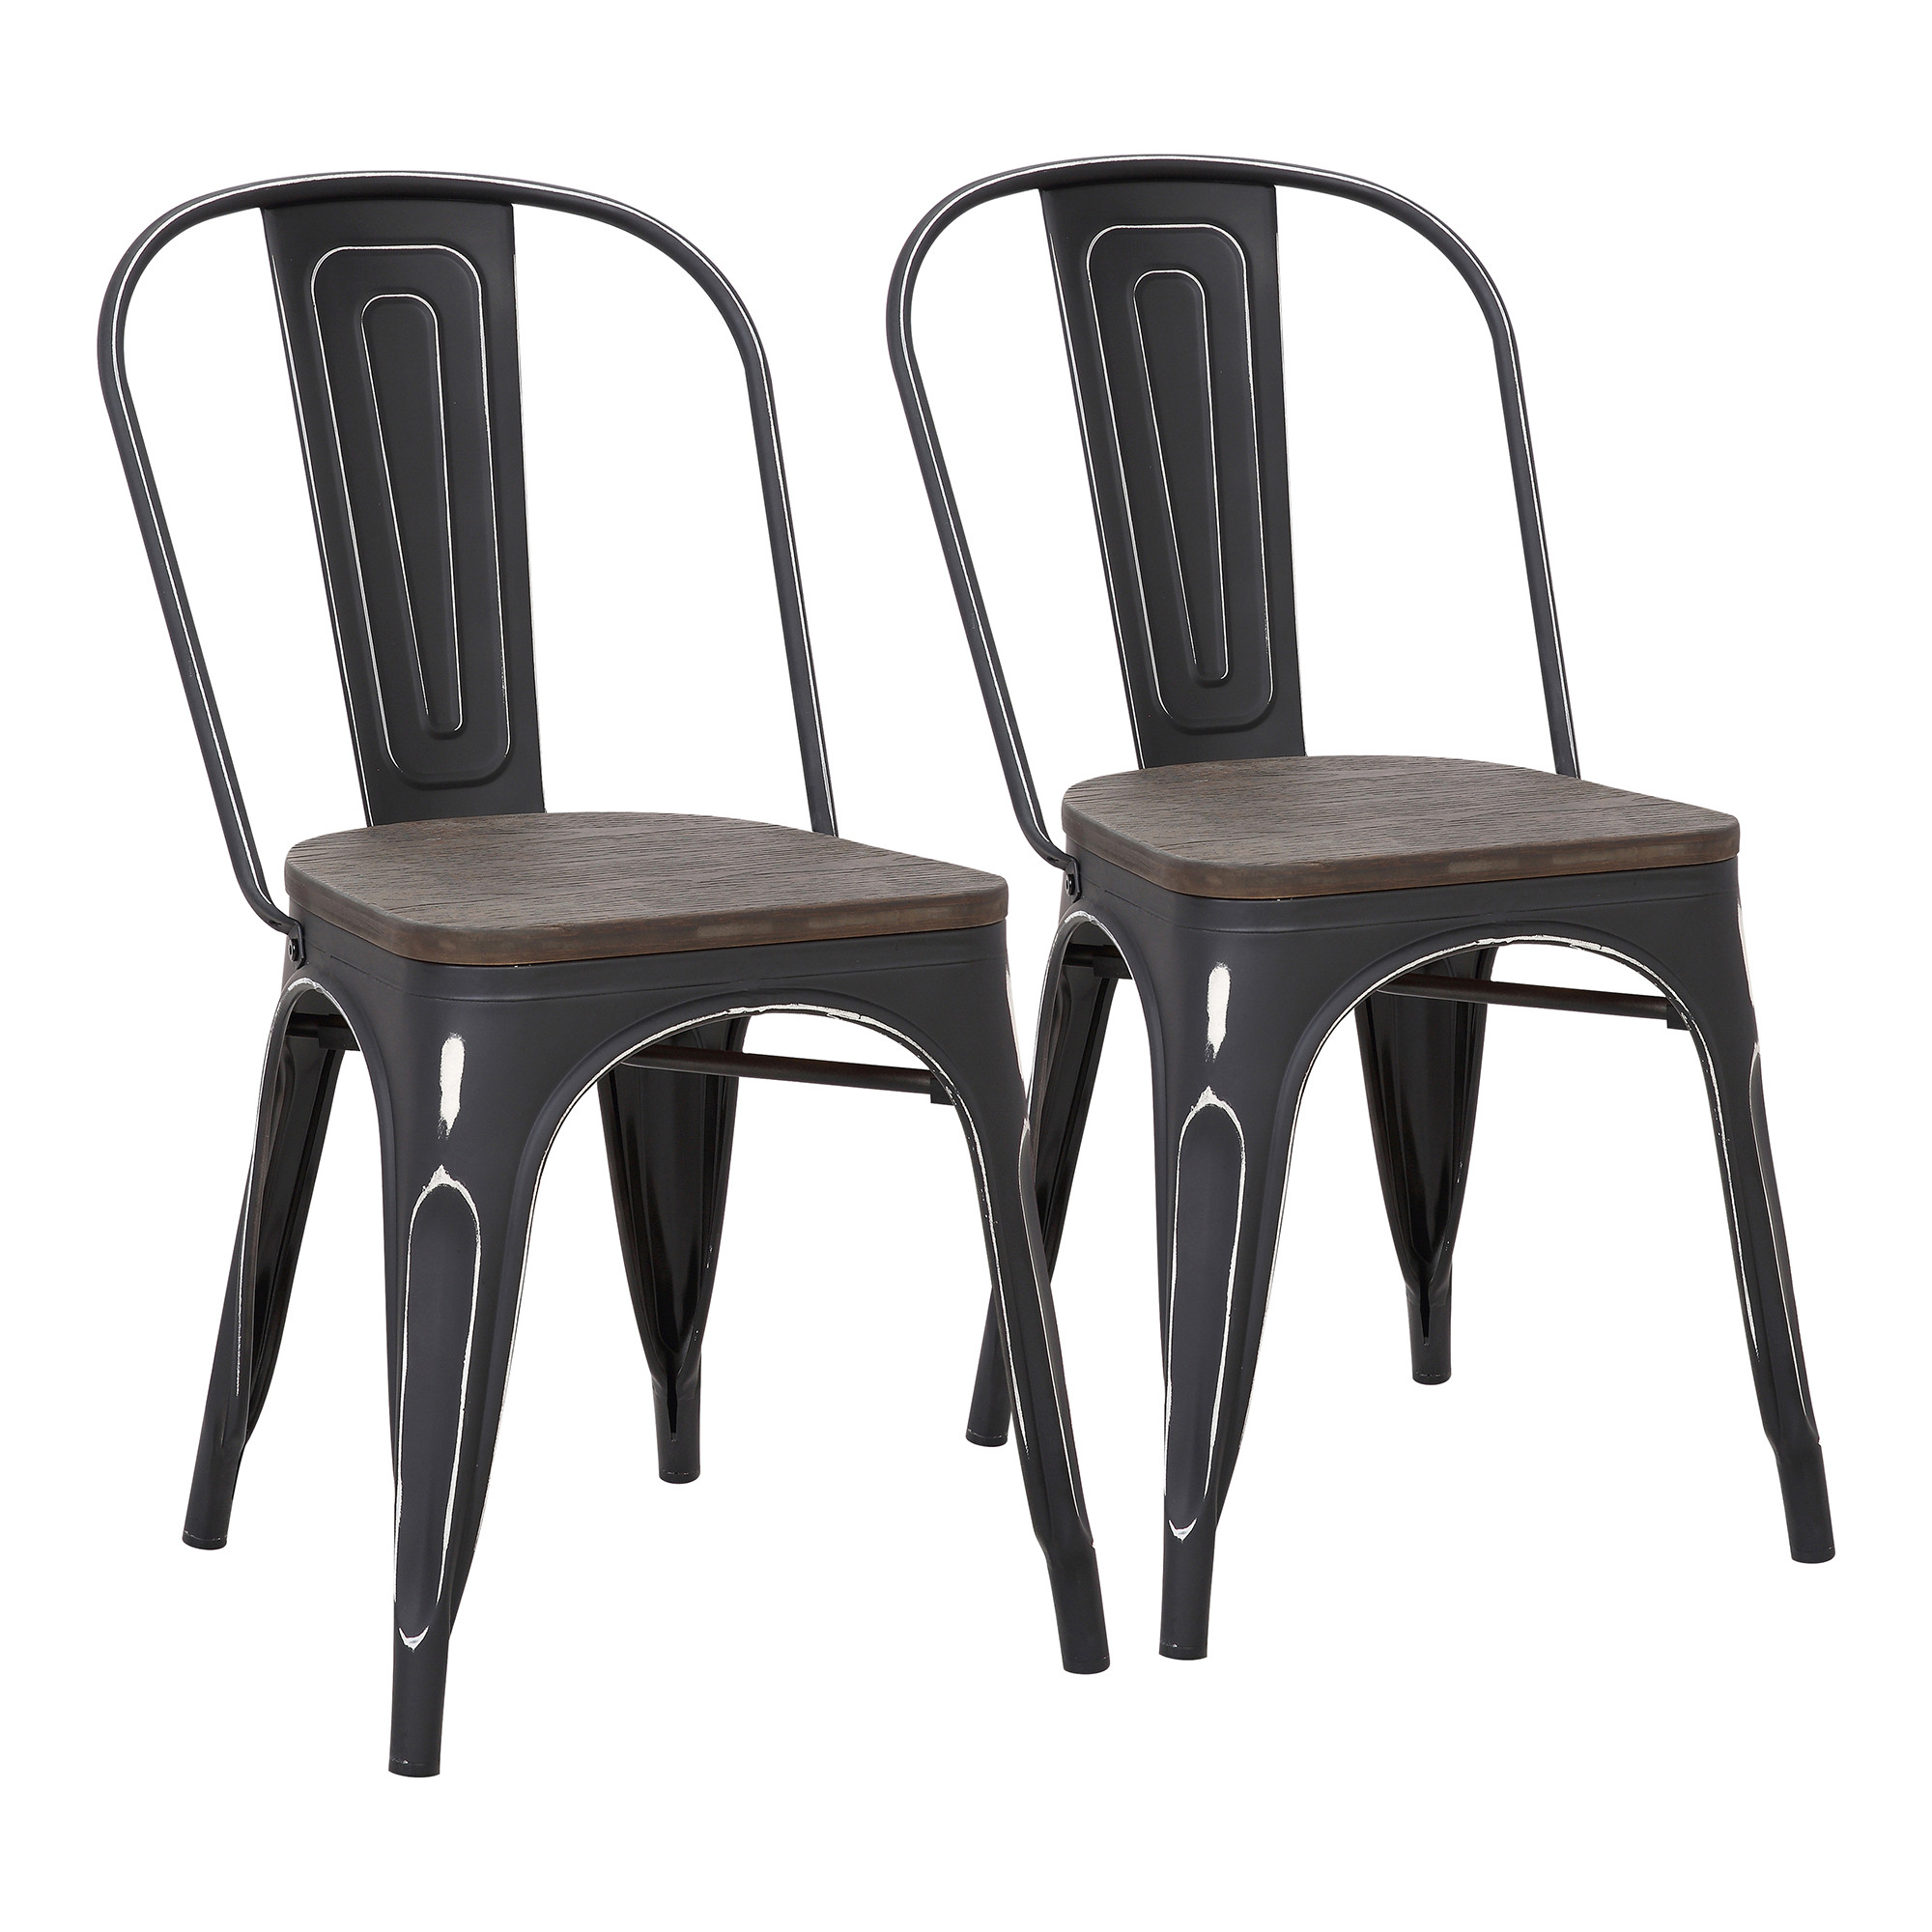 Contemporary Home Living Set of 2 Espresso Wood-Pressed Seat with Vintage Black Metal Dining Chair 32.5"